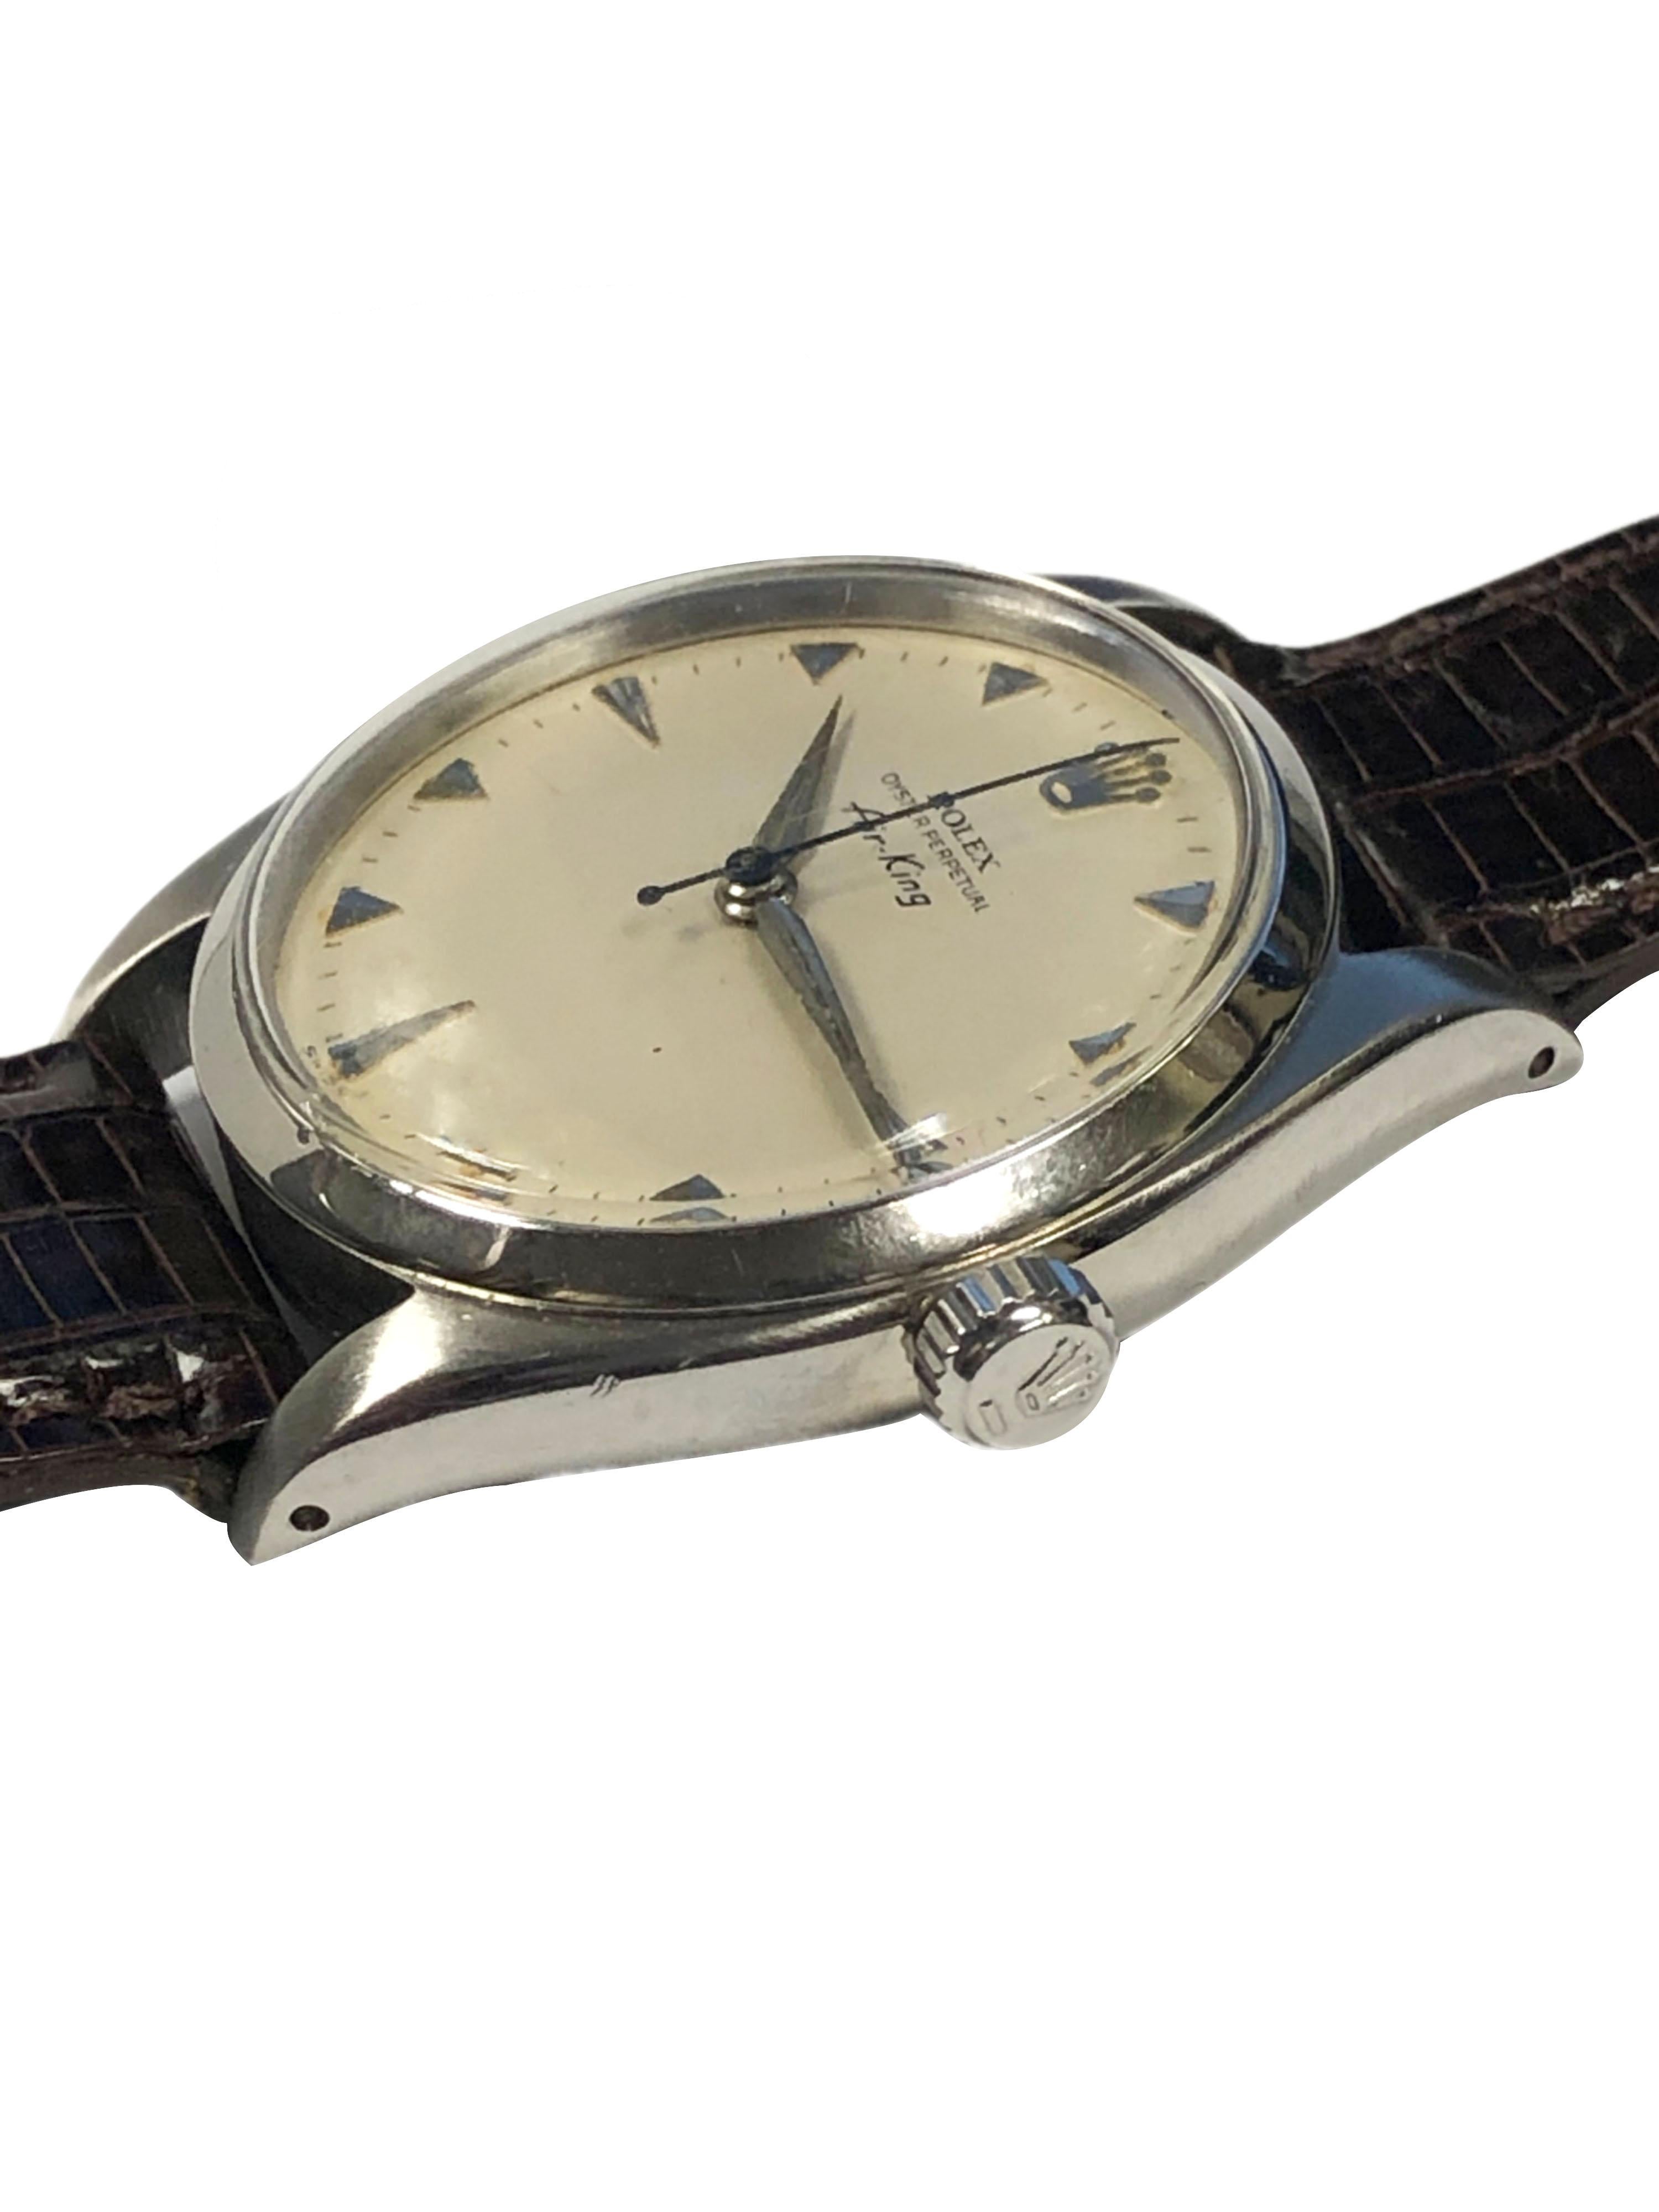 Circa 1946 Rolex Air King, Reference 5500 34 M.M. Stainless Steel 3 Piece Oyster case with Smooth Bezel and screw down Crown. Caliber 1500 17 Jewel mechanical, self winding movement. Original Near mint condition Silver Satin Dial with Scarce raised